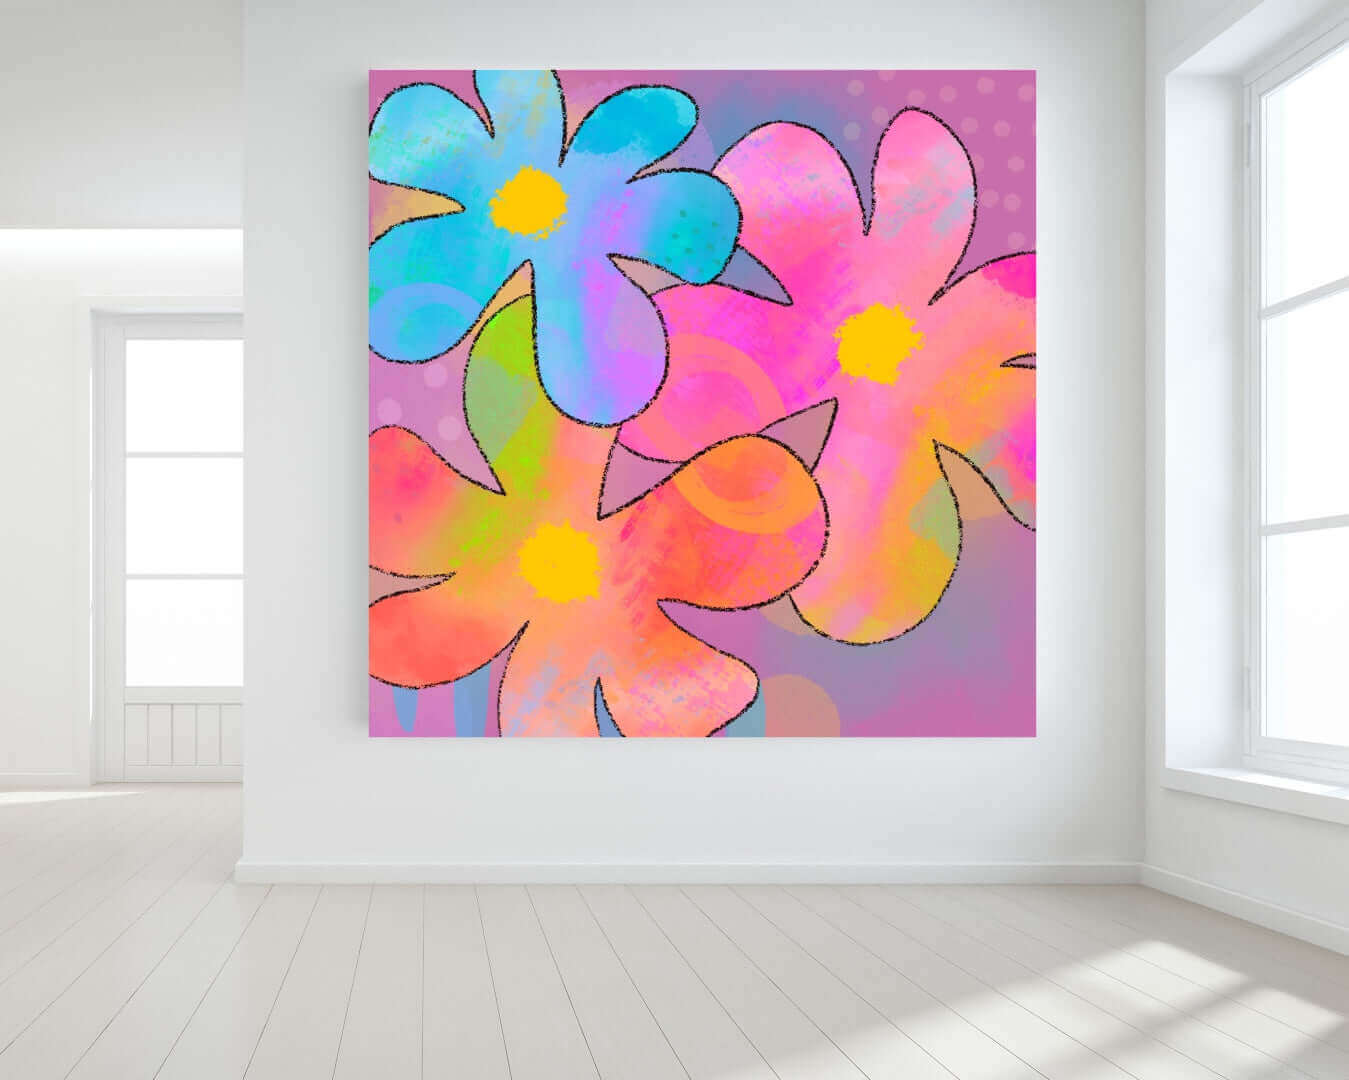 Big Colorful 1960s Psychedelic “Hippie Flowers” Canvas Print Wall Art Large Canvas on Wall